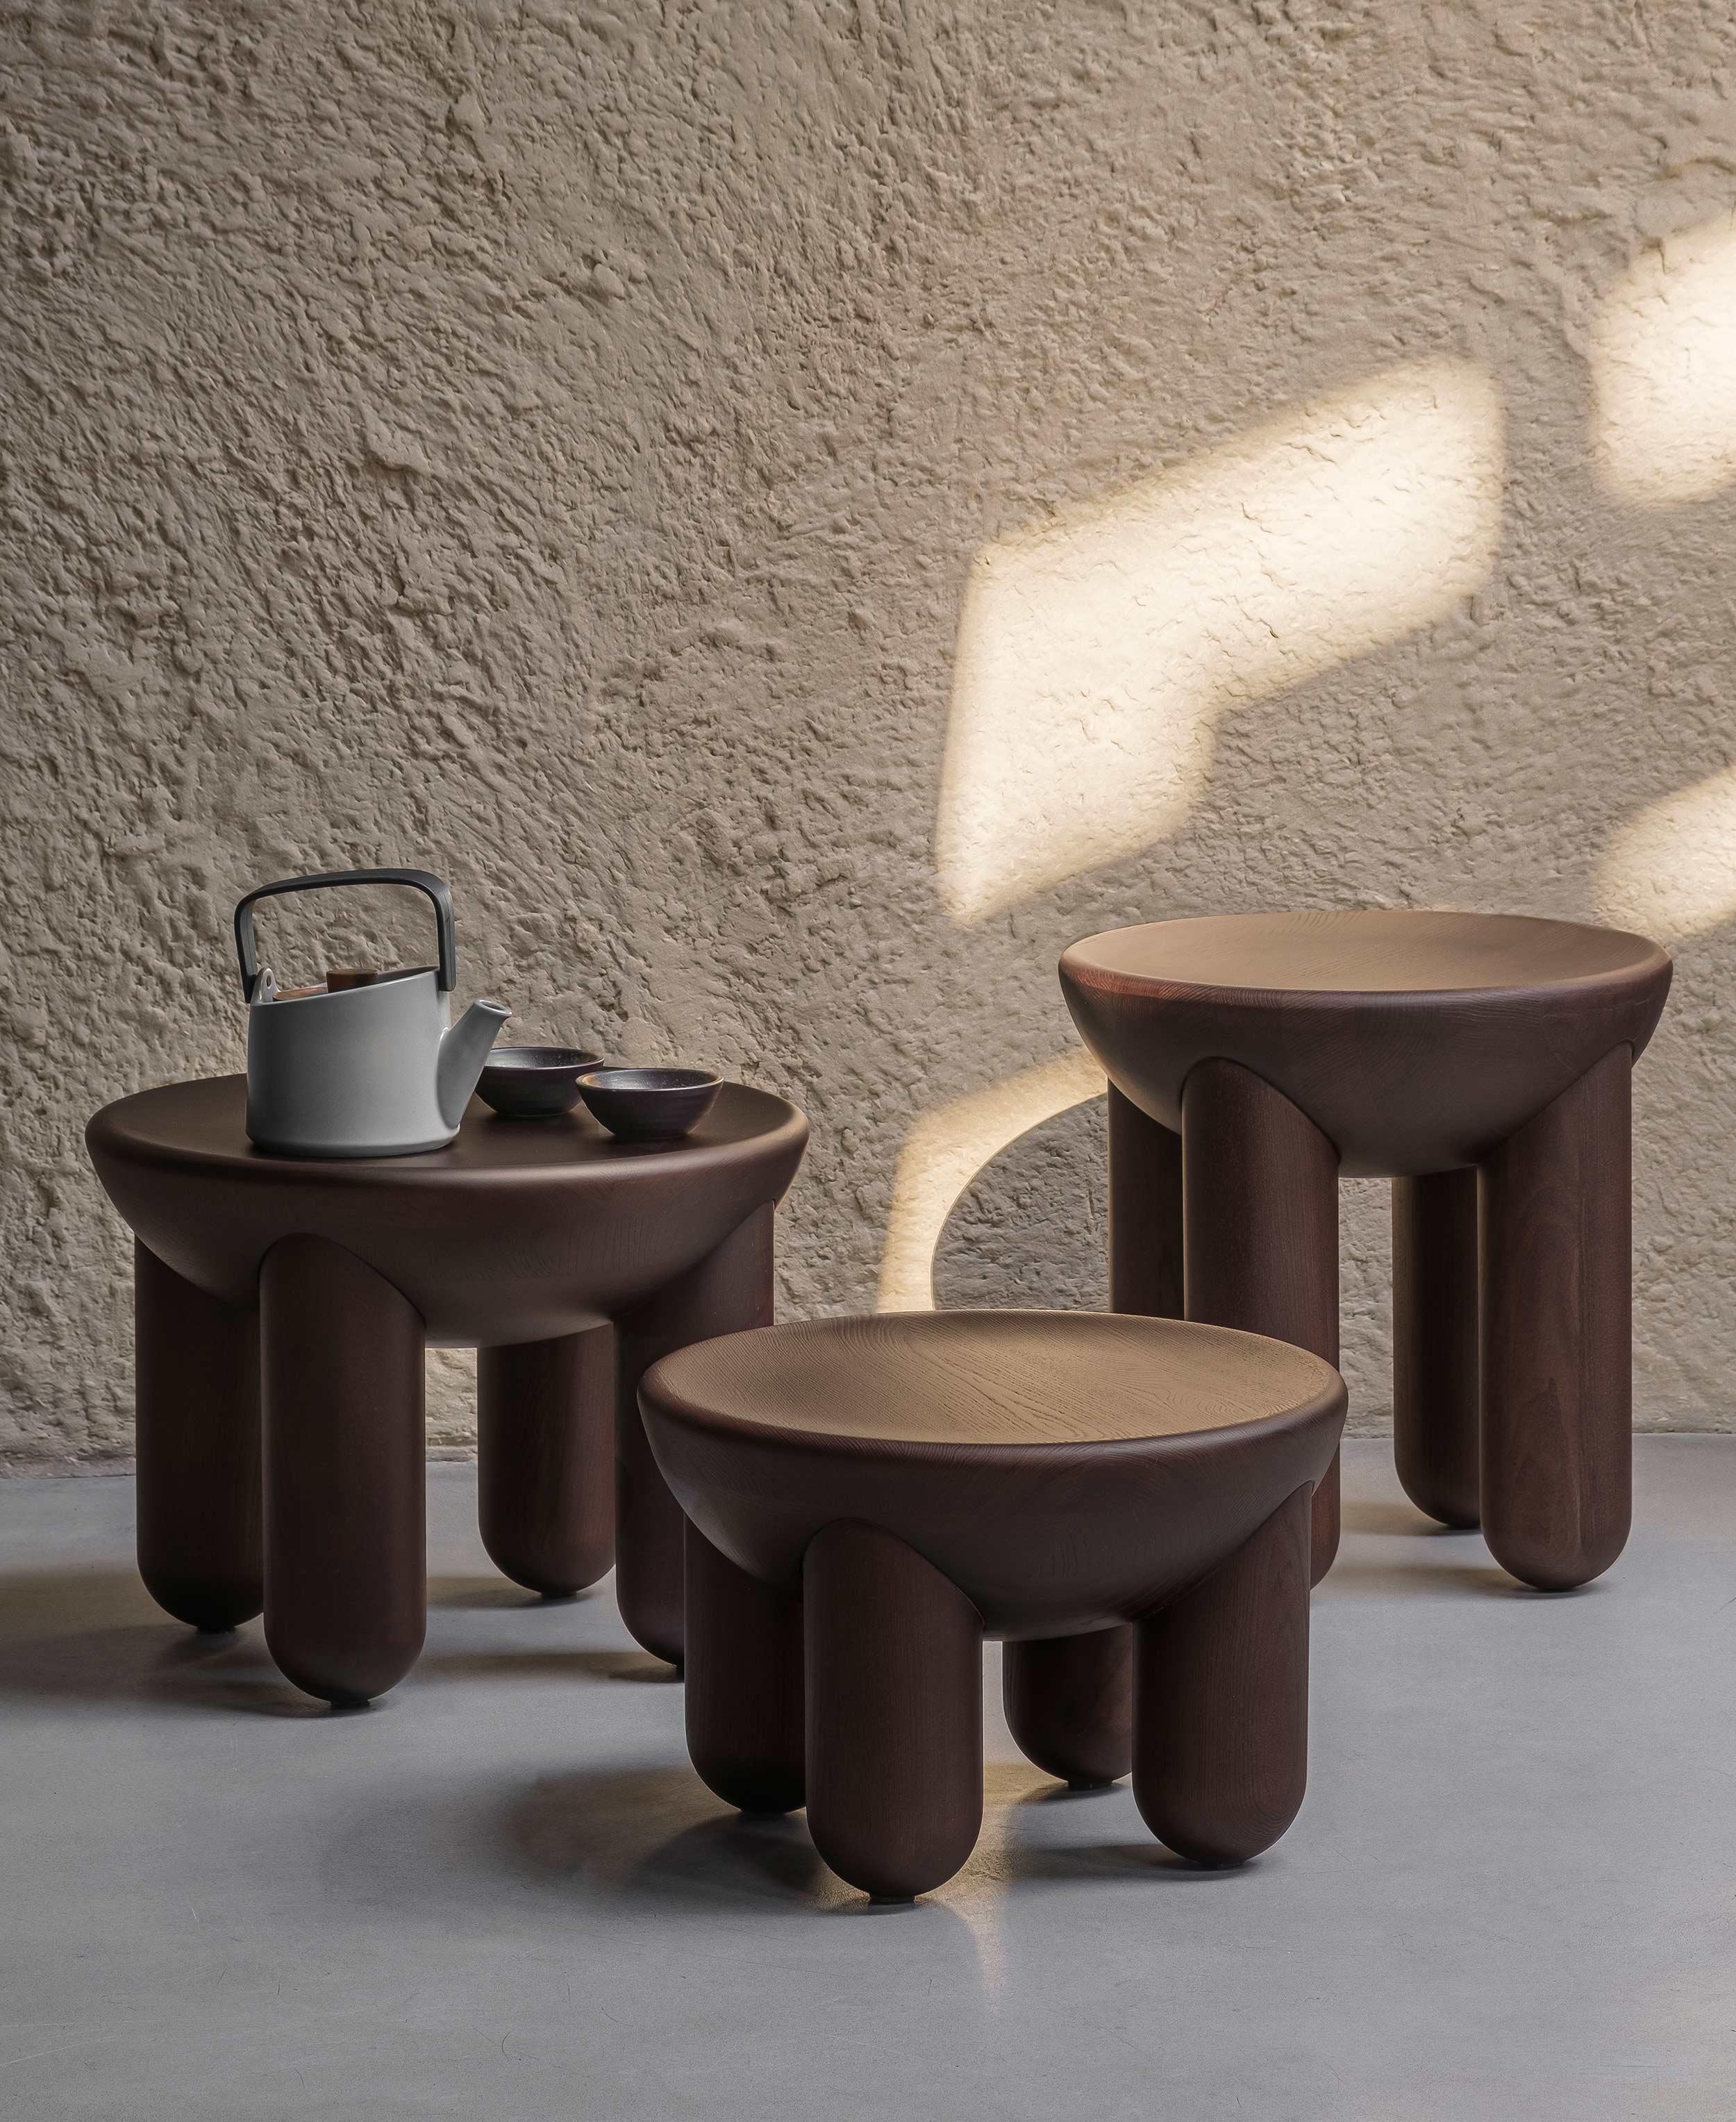 Gently rounded coffee tables “Freyja” created as an homage to femininity and natural beauty.
These sculptural and sensual tables, named after Freyja, a Scandinavian goddess of love, beauty, and fertility, are designed to evoke a sense of warmth,